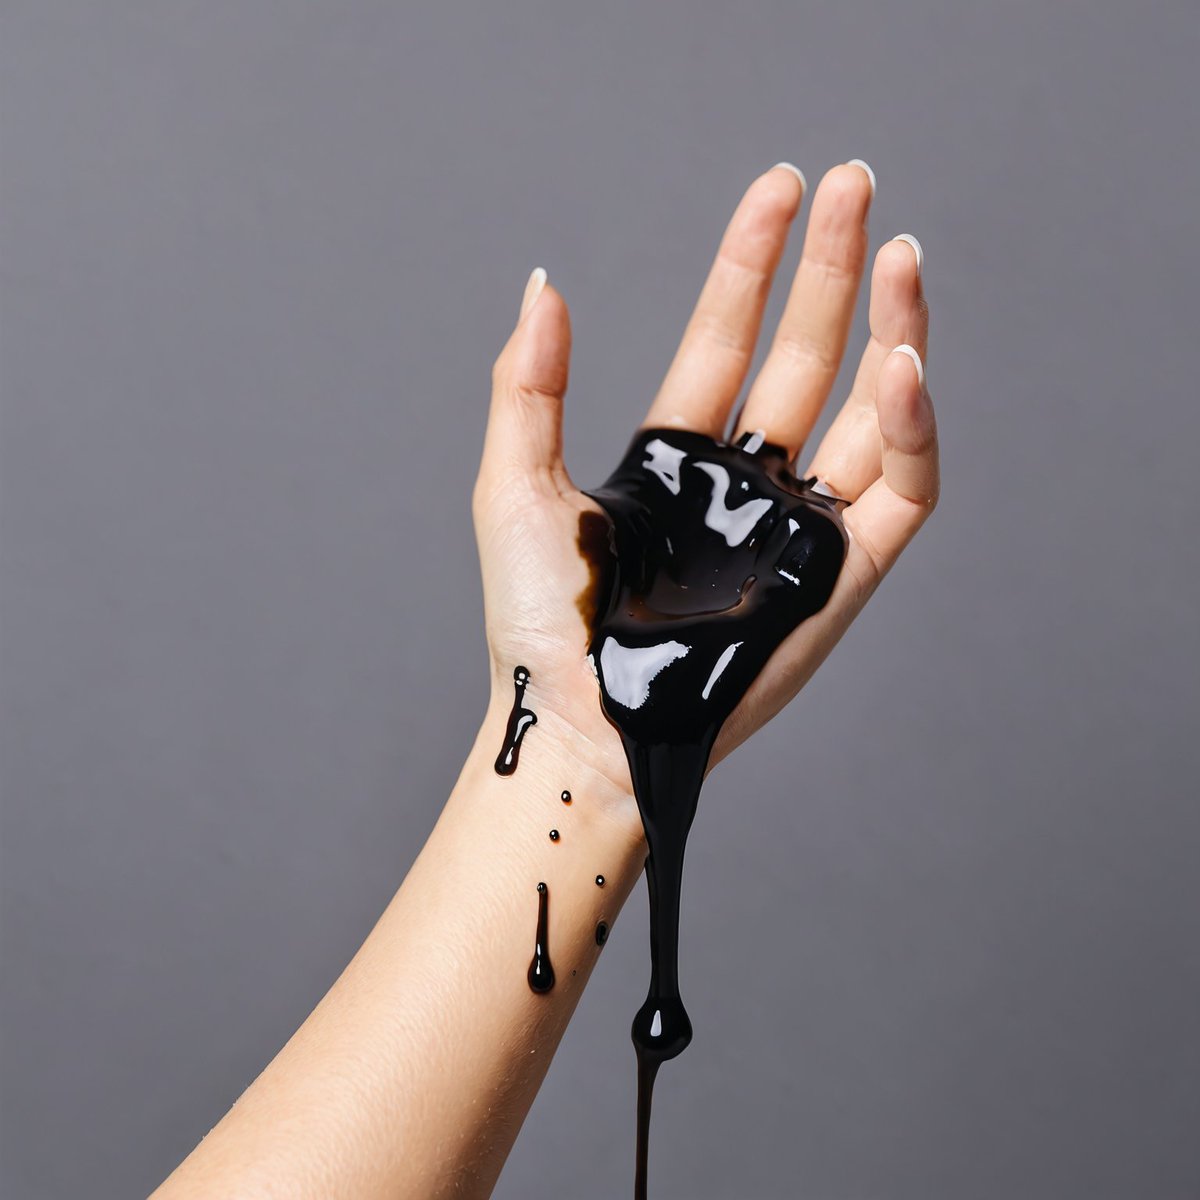 We are working on new pipeline for powering text2image service for @Imagine_aiart . Releasing in two weeks Prompt : black viscous liquid dripping on the hand of a woman